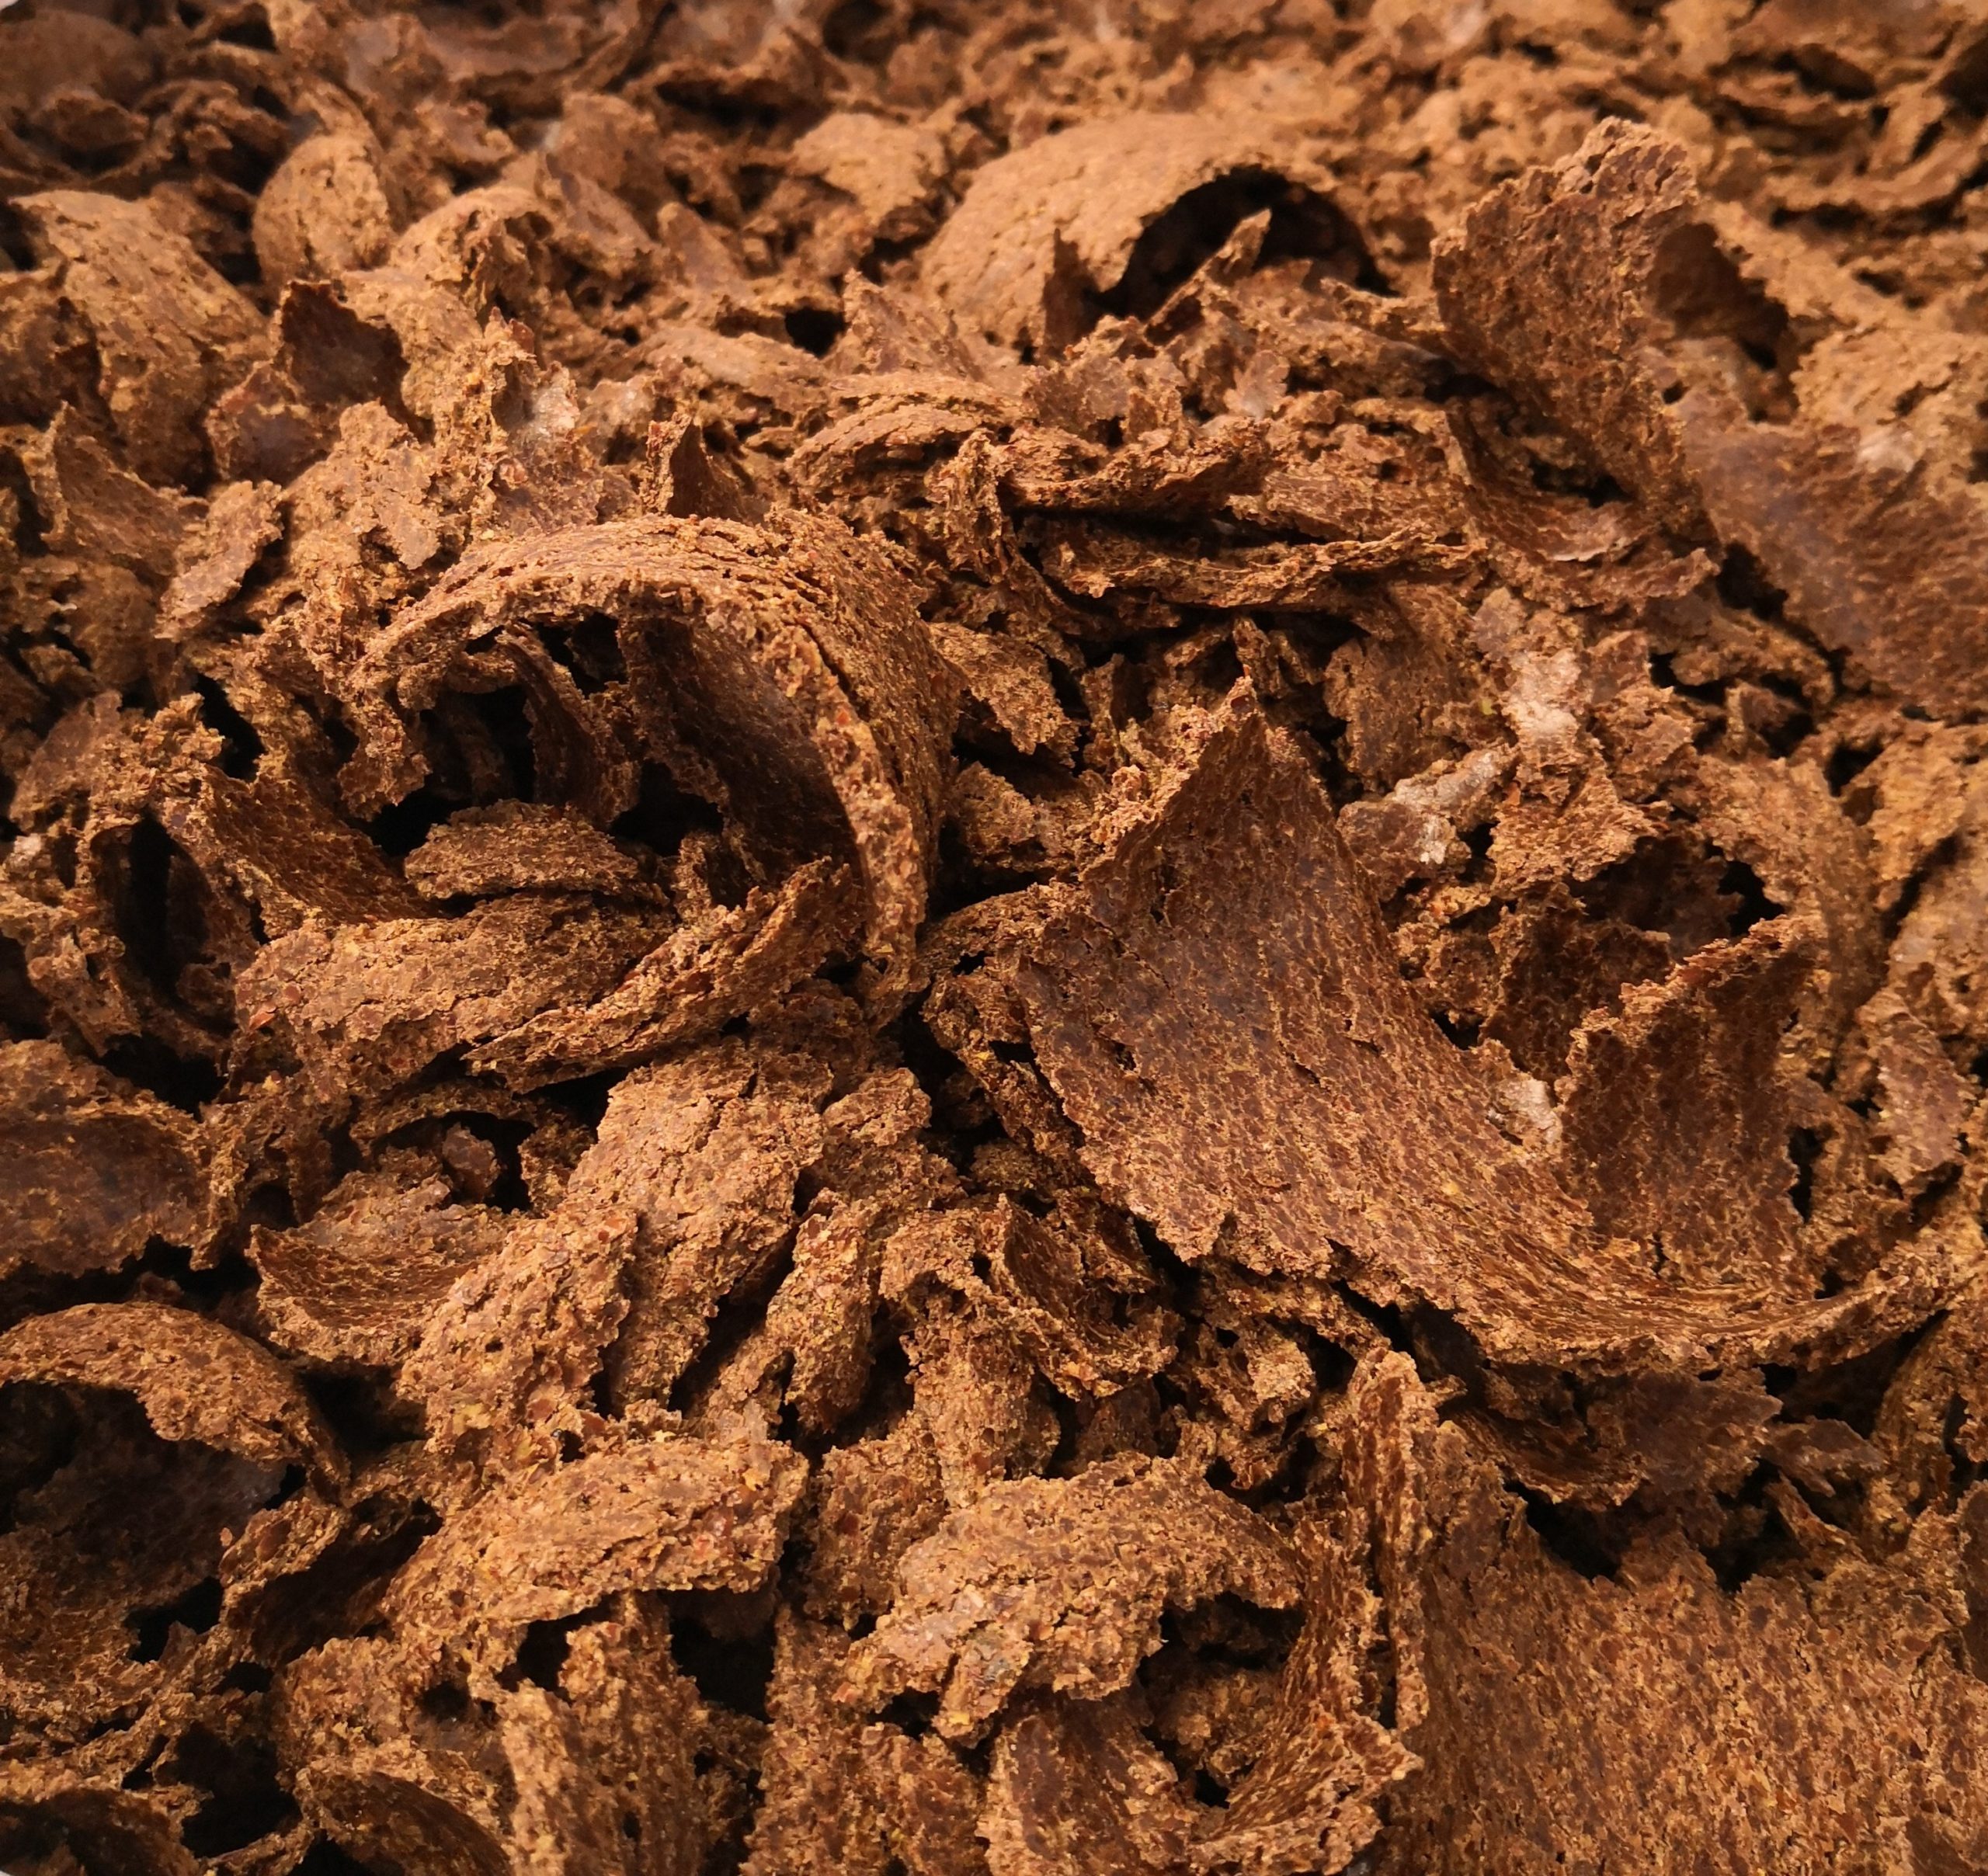 Linseed meal flakes from cold-pressed linseed (flaxseed) oil production